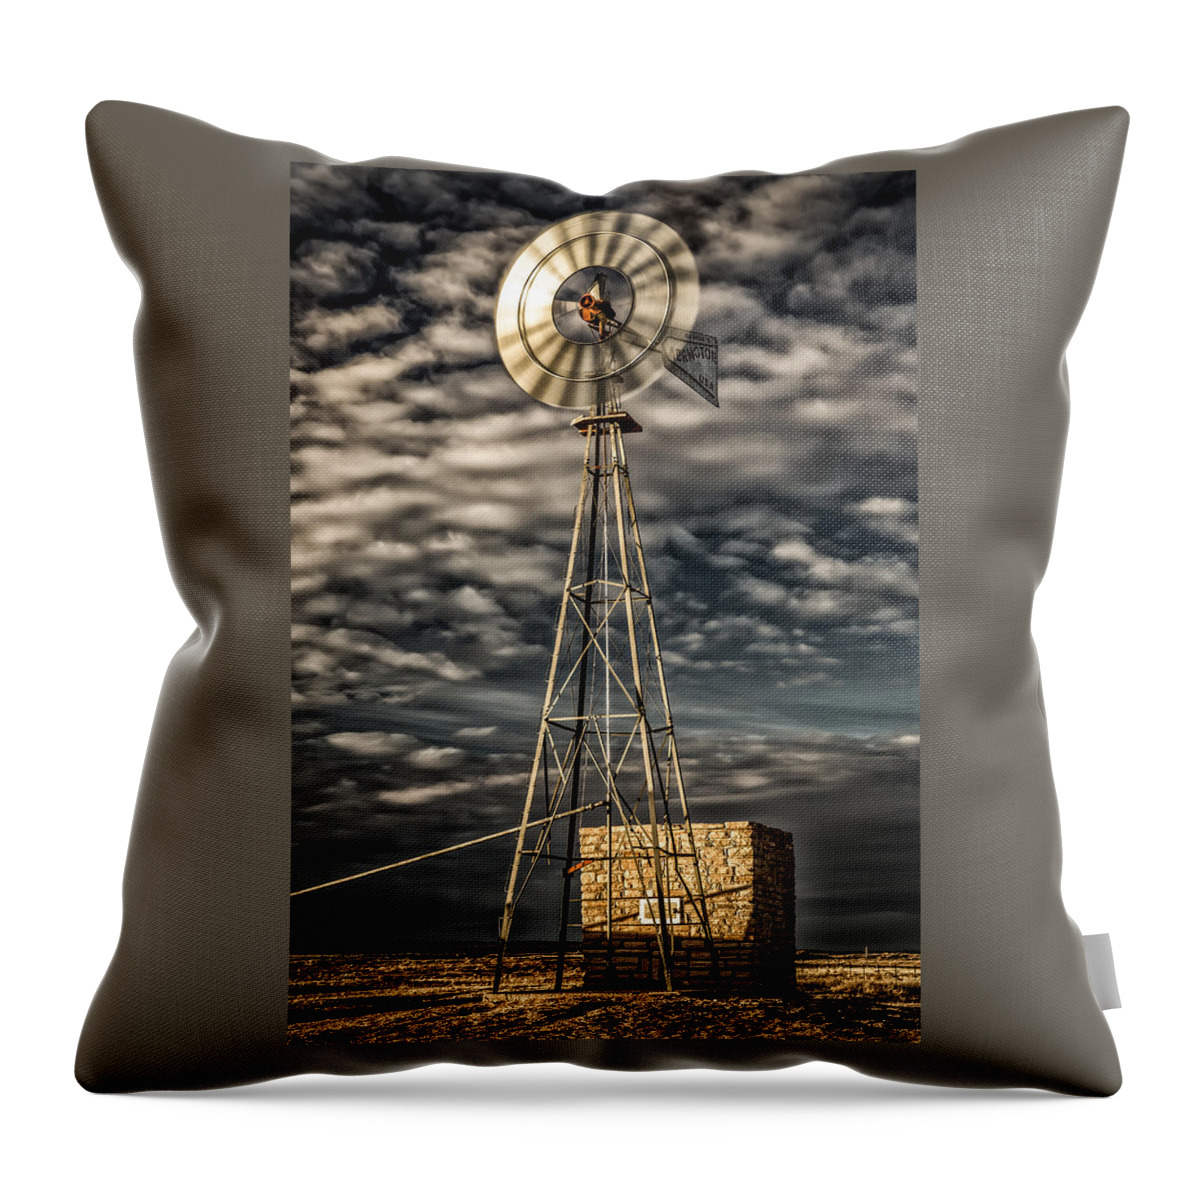 Art Throw Pillow featuring the photograph Unseen Winds by Gary Migues